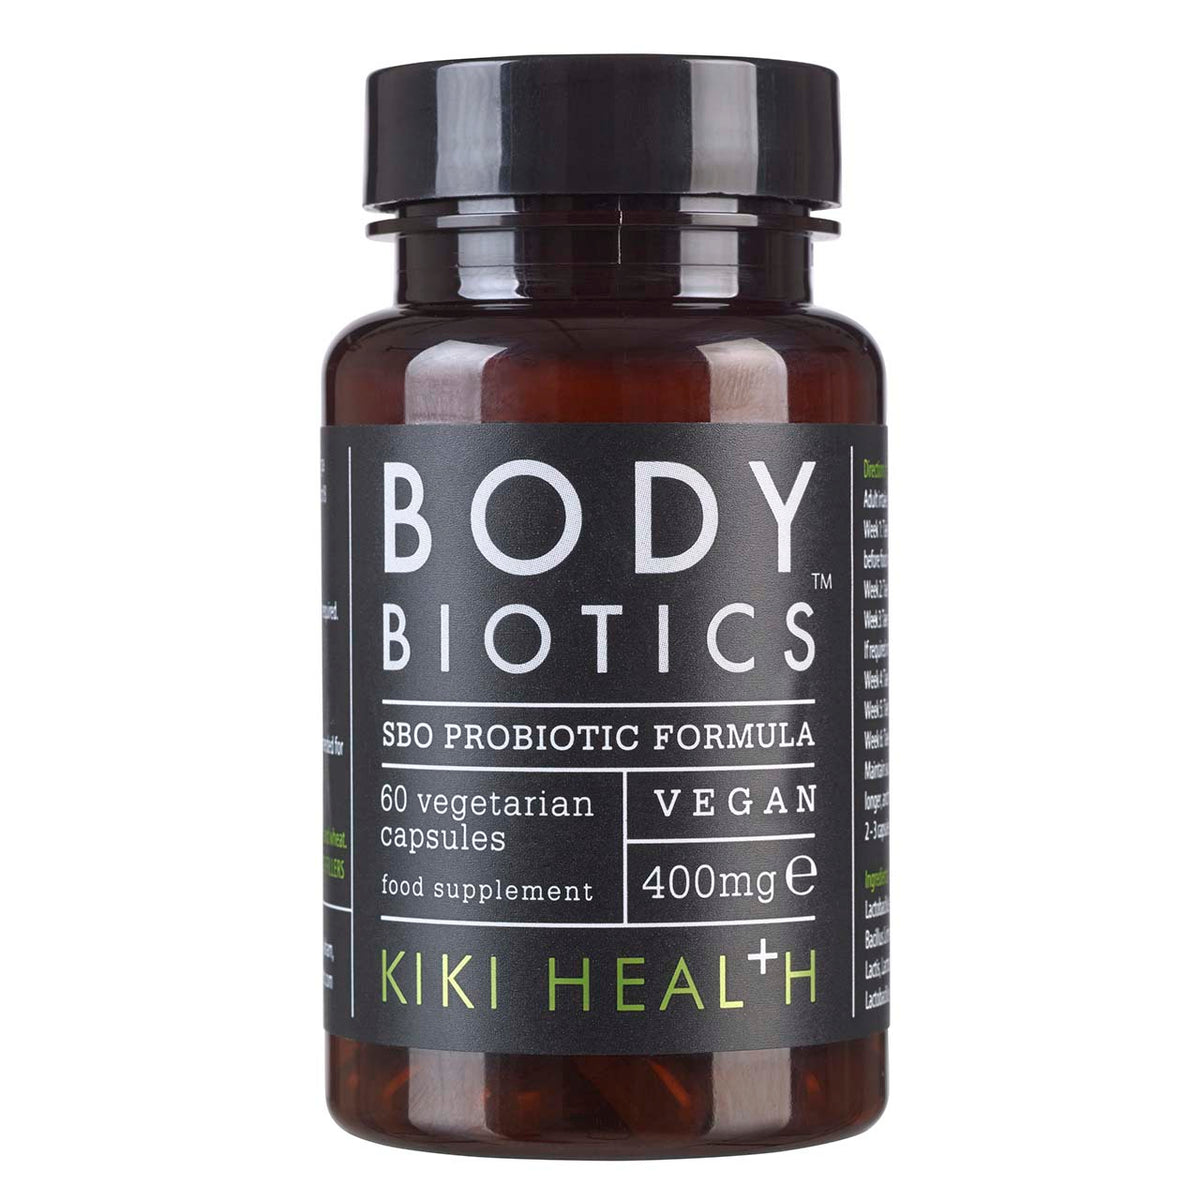 Body Biotics | Kiki Health | Raw Living UK | Supplements | Kiki Health Body Biotics™ (60 x 400mg) probiotics mimic nature for the benefits of true bacterial cultures. Cultured and encapsulated in ancestral prebiotics.